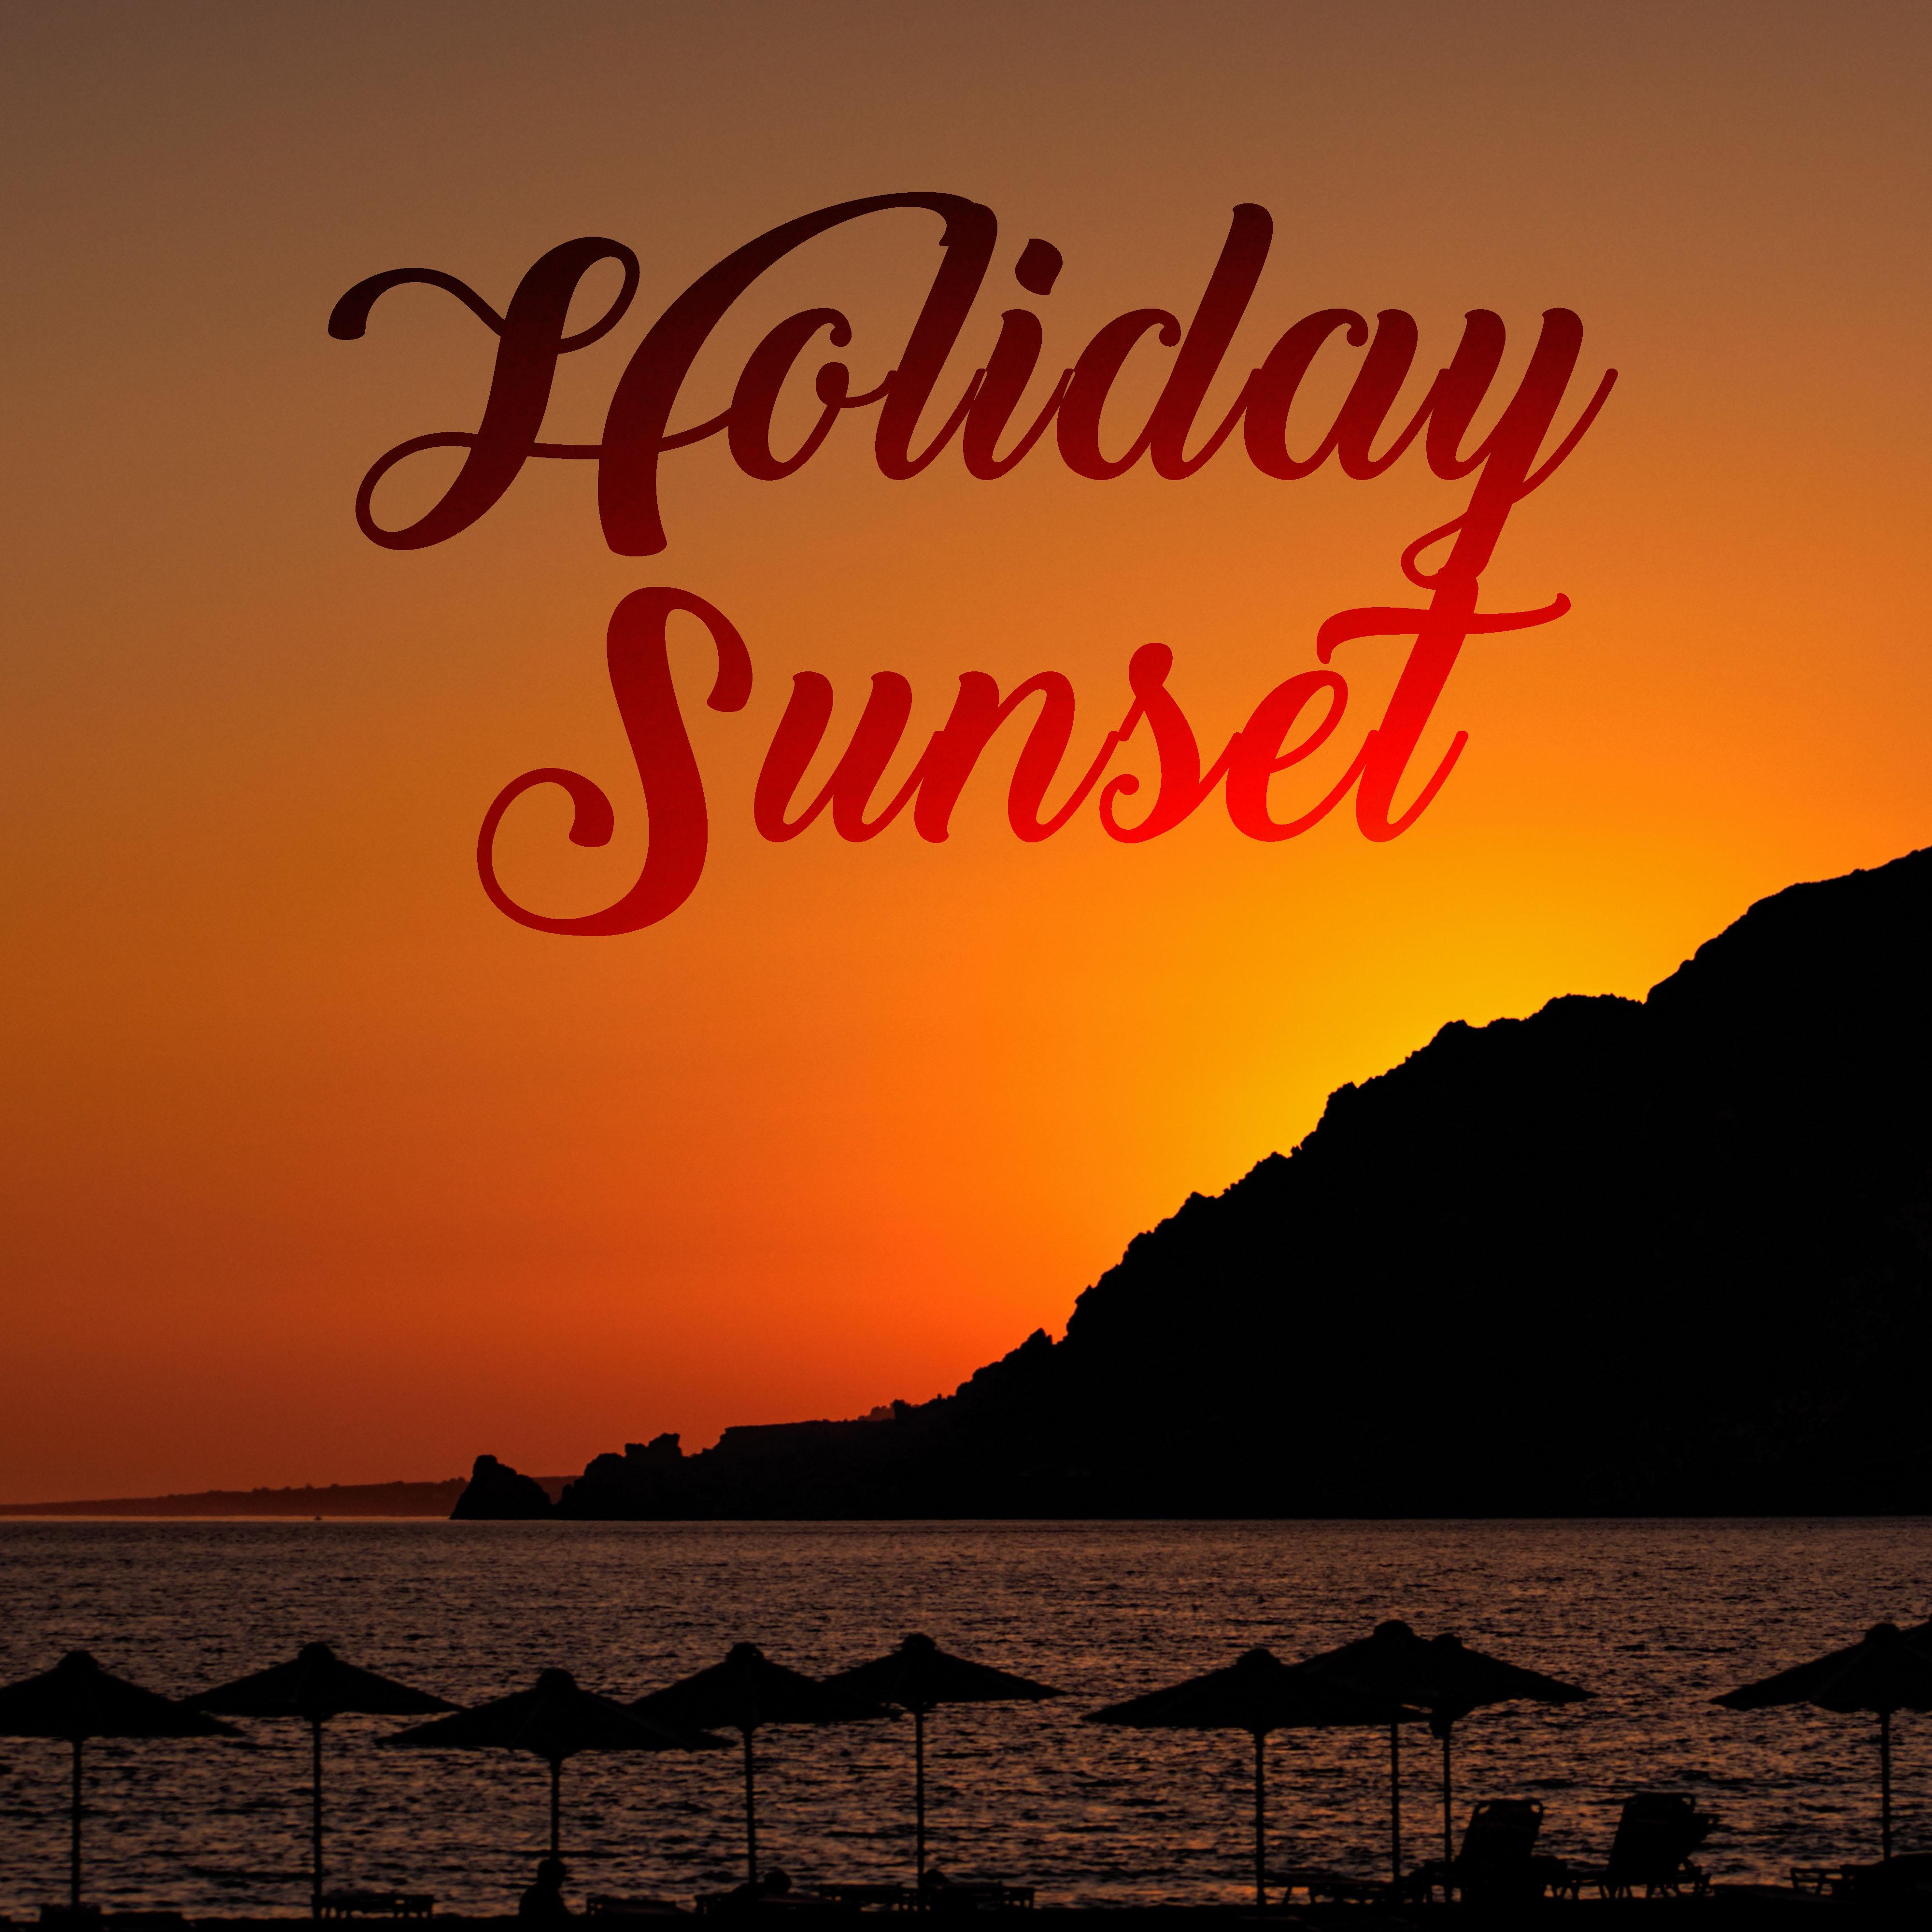 Holiday Sunset  Tropical Chill Out Music, Ibiza Summertime, Relax, Beach Chill, Peaceful Music for Rest